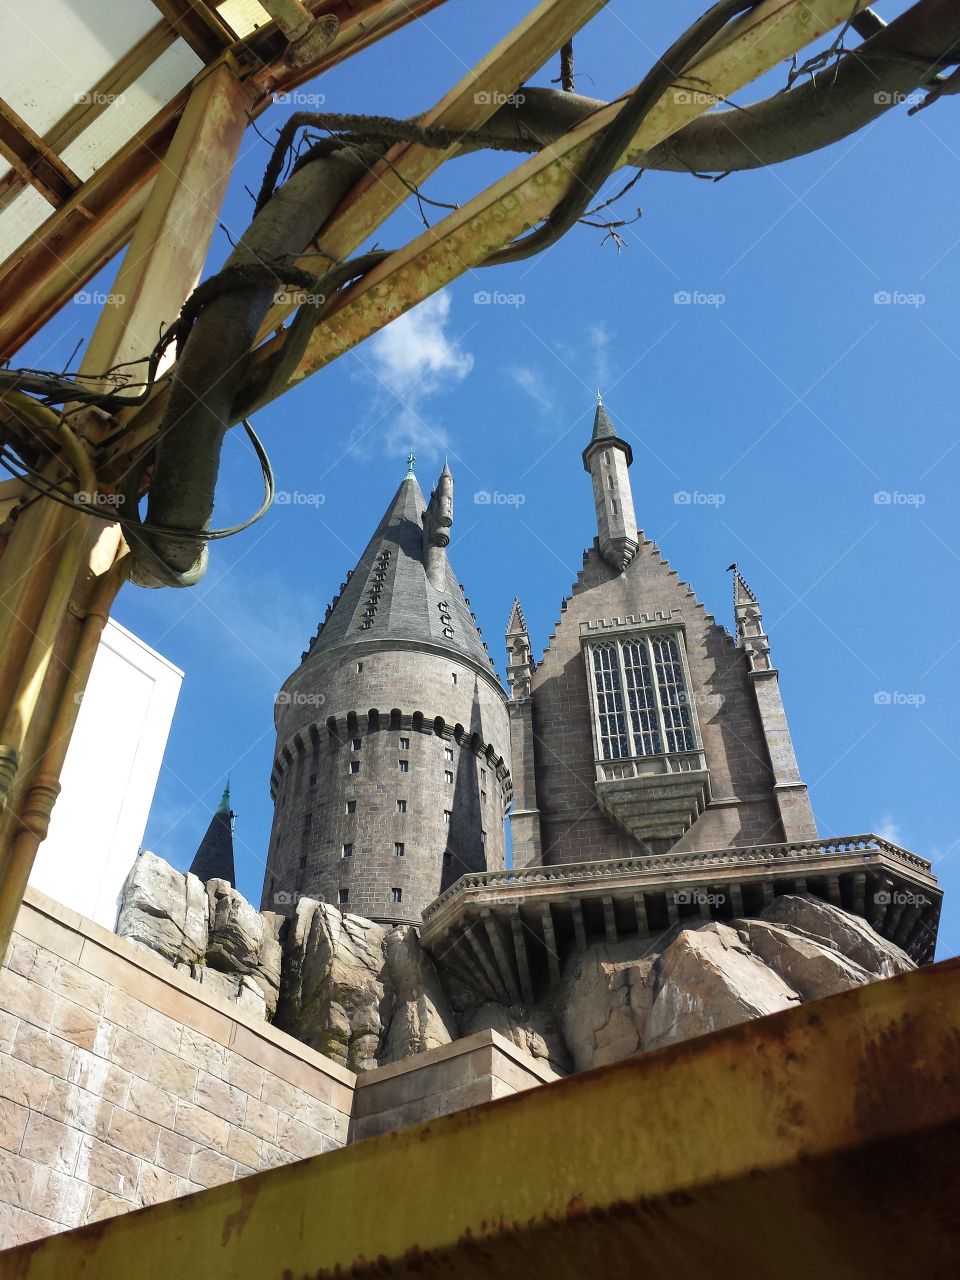 Green House view of Hogwarts . taken from the line at Harry Potter land